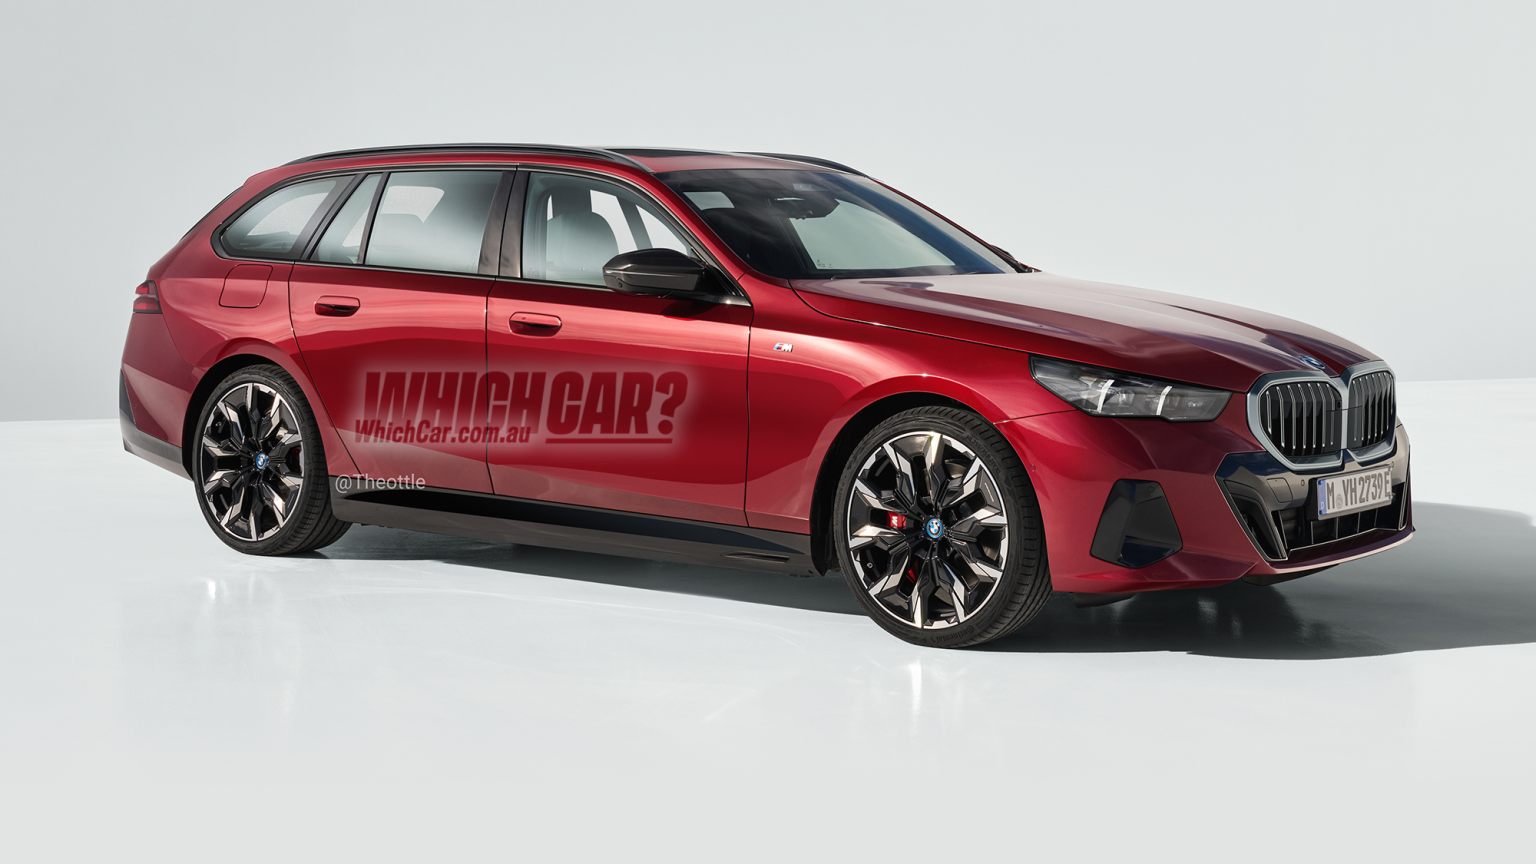 2024 BMW 5 Series Touring wagon imagined